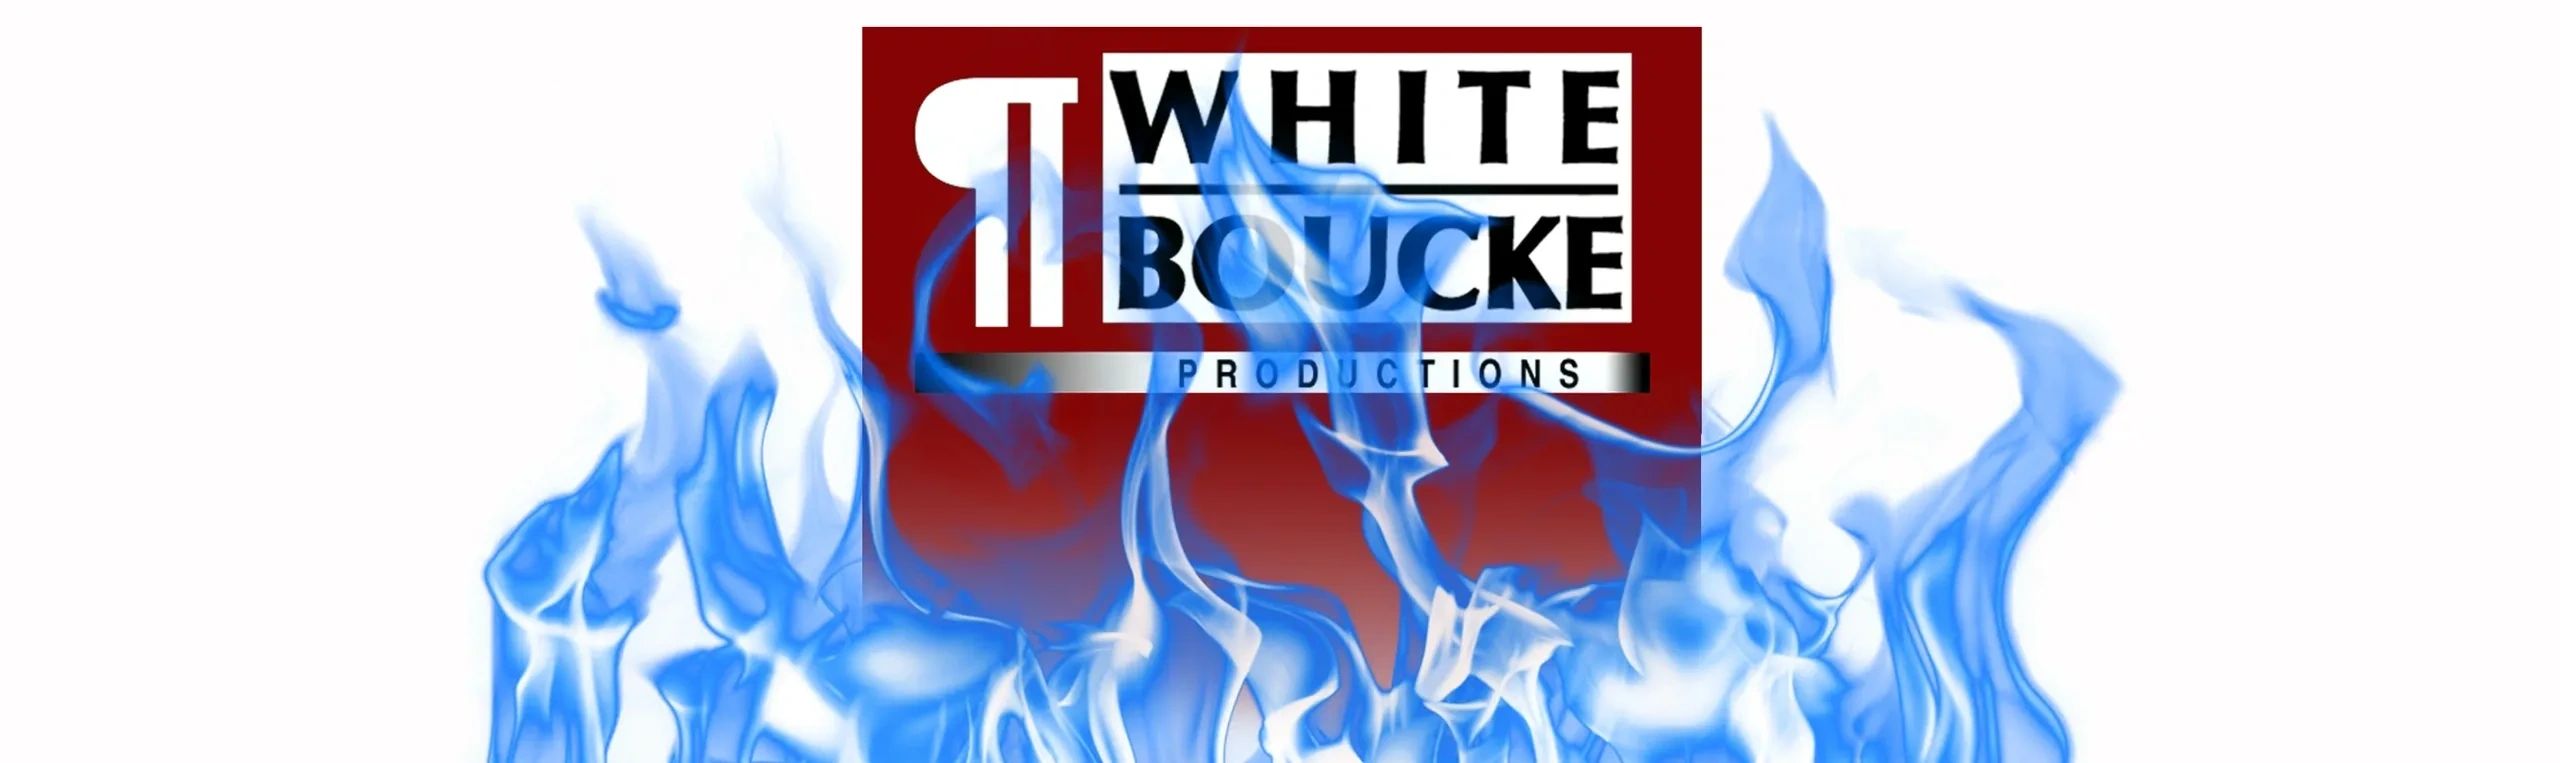 The White-Boucke website cover image of logo and name licked by blue flames